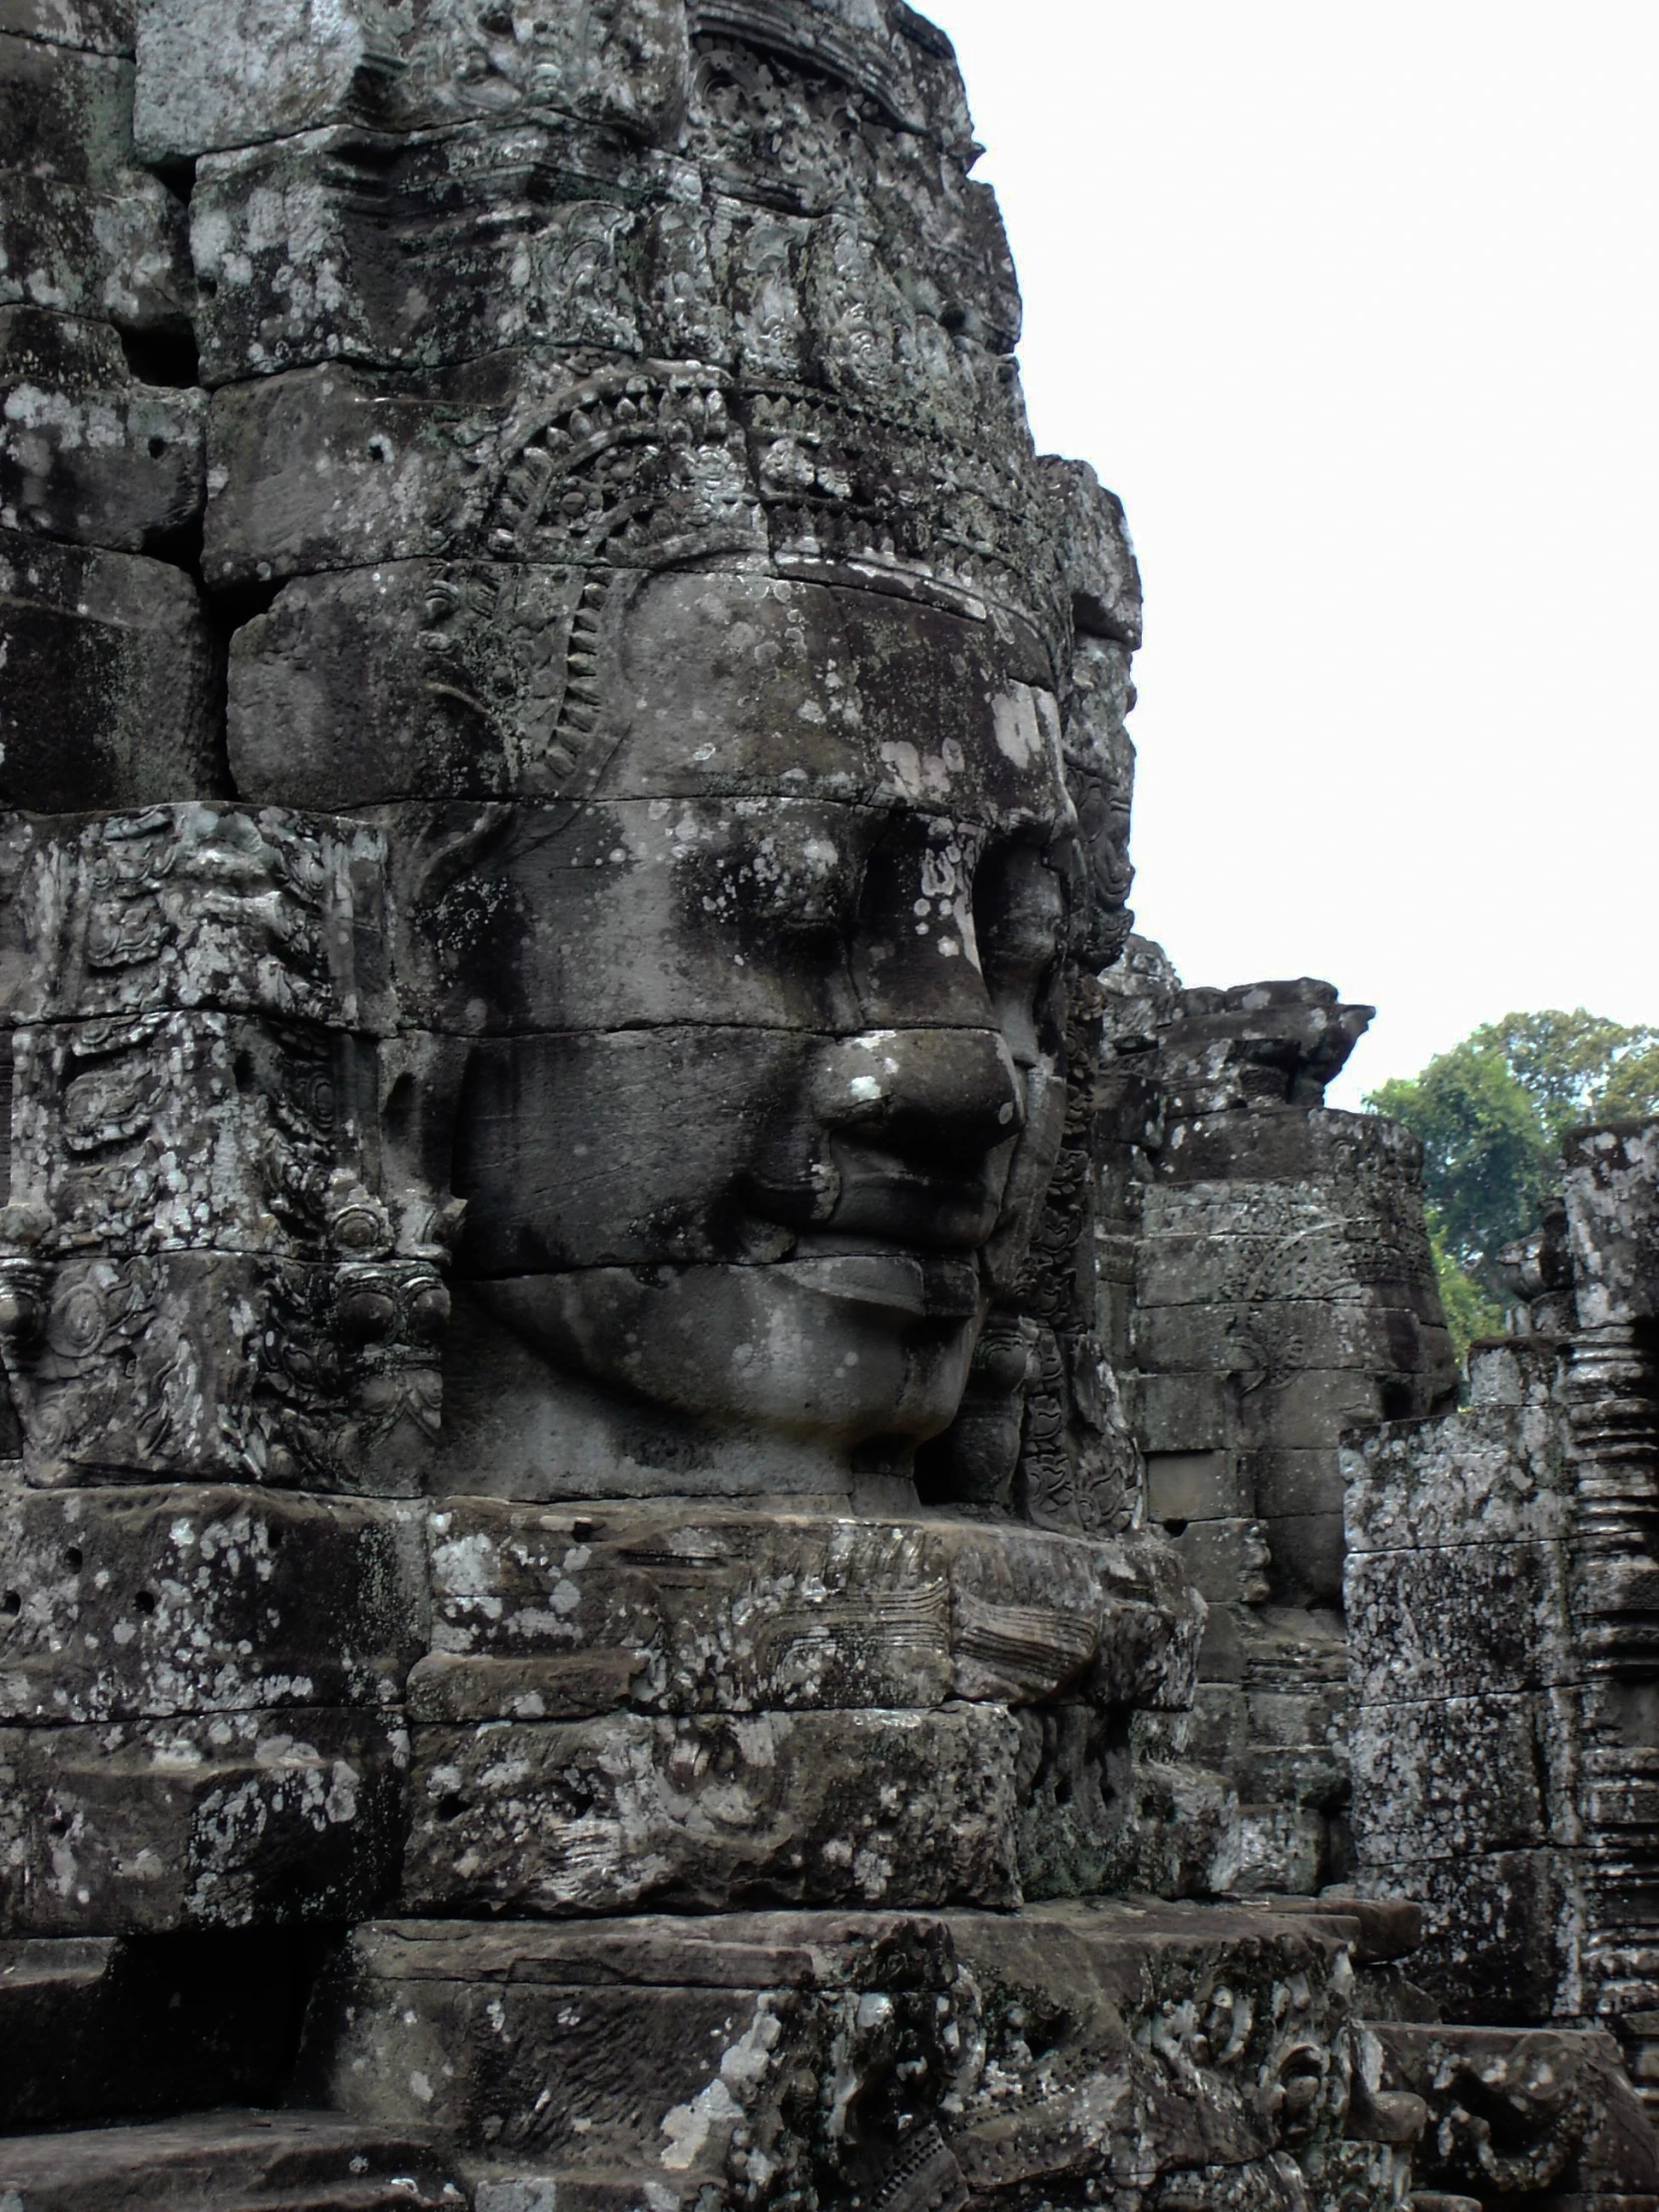 a large, intricate statue on top of an ancient stone face